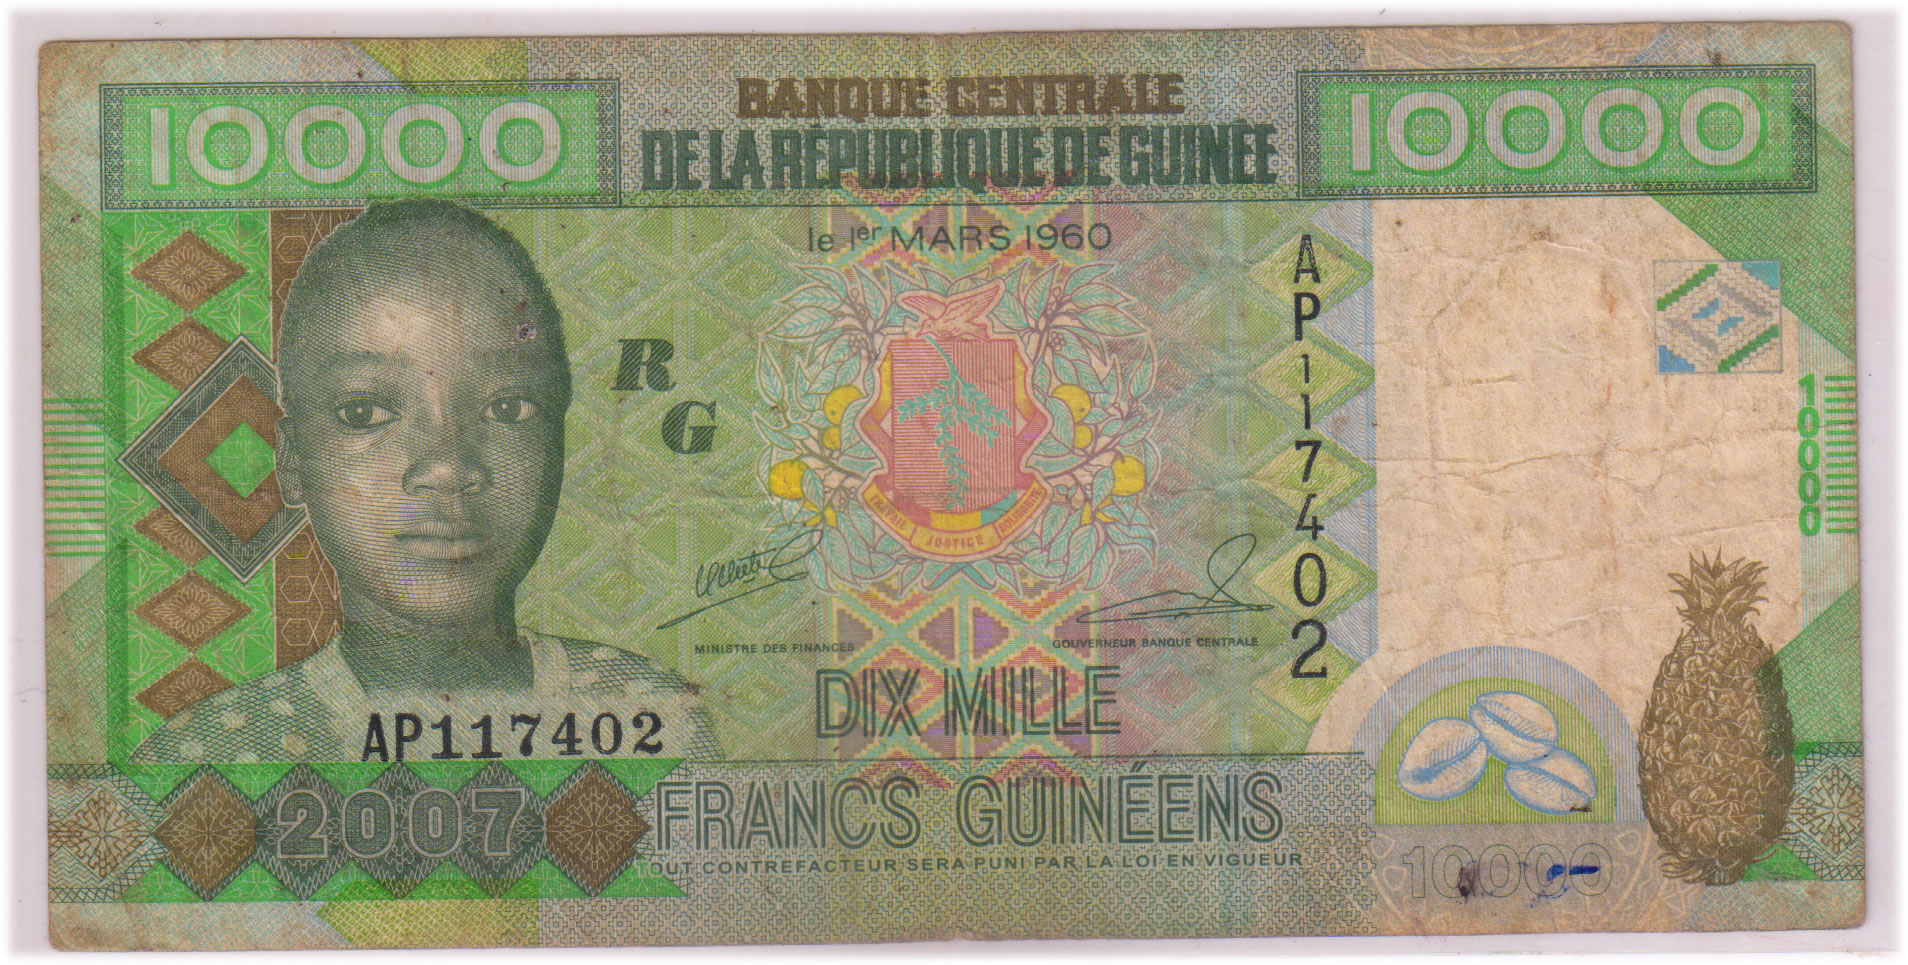 Ghana 10000 Fg 1960 used currency note KB Coins Currencies